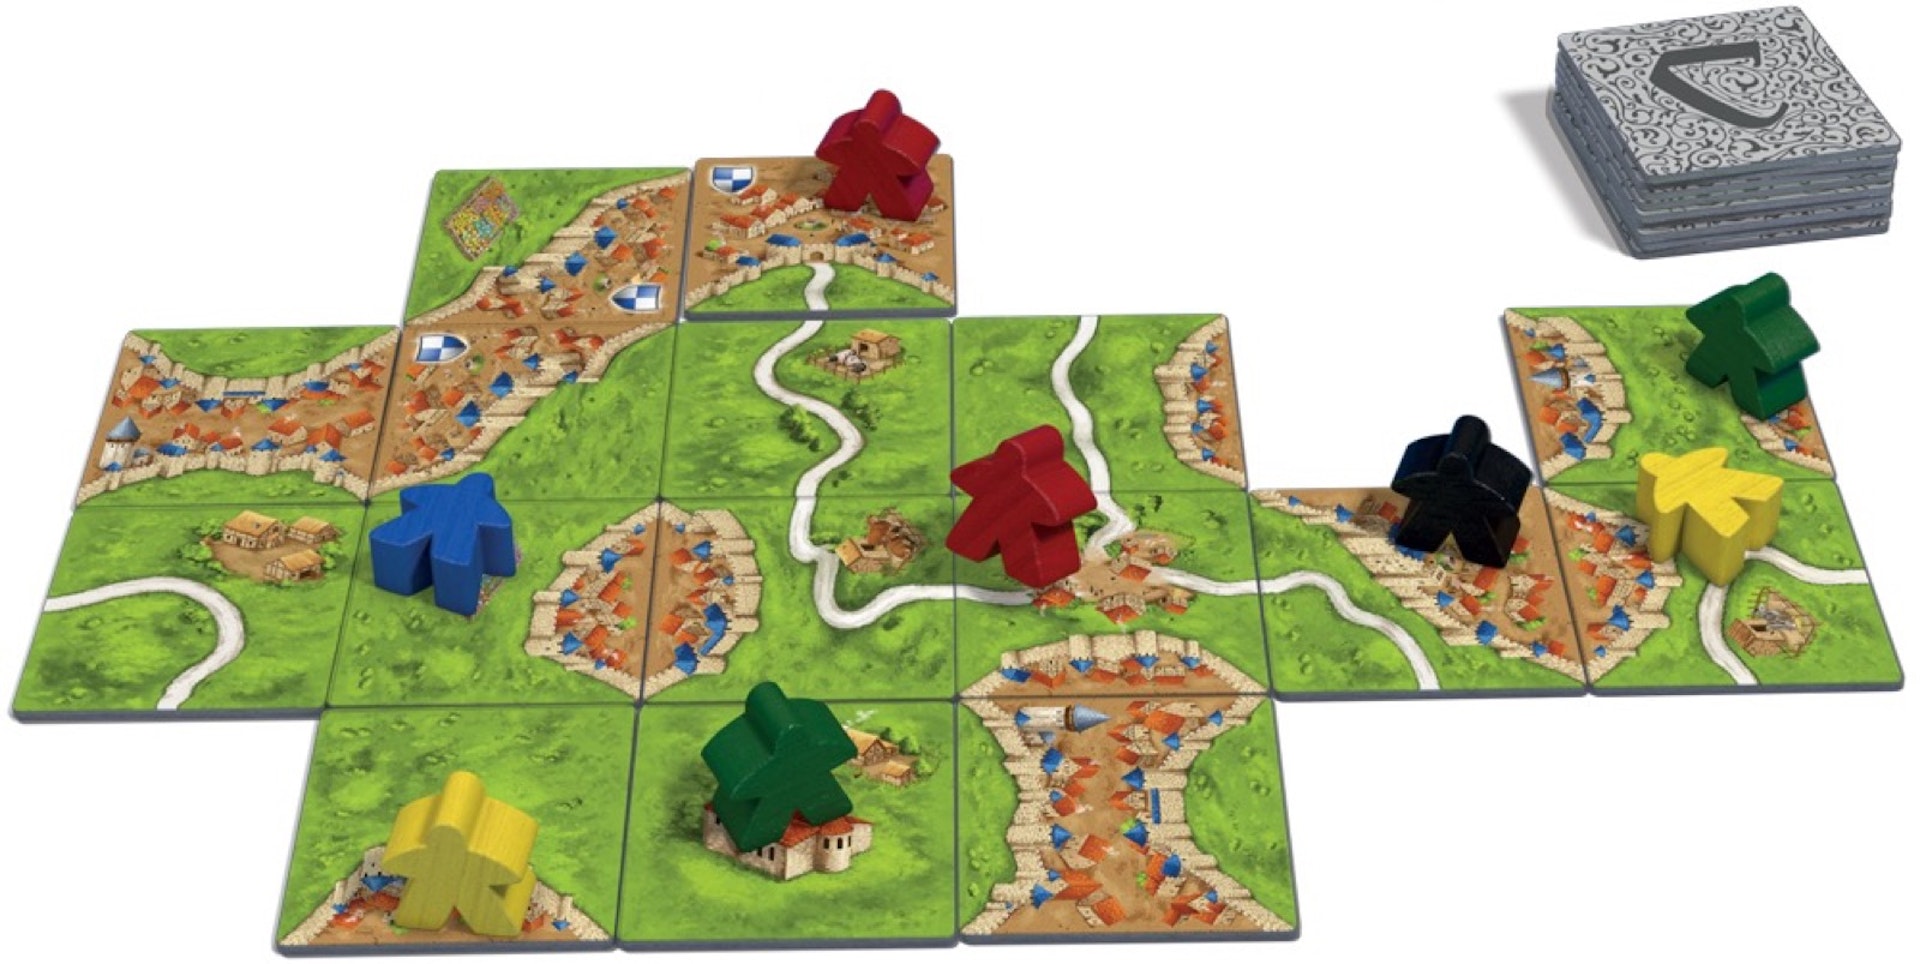 The board game Carcassonne is laid out on a white background